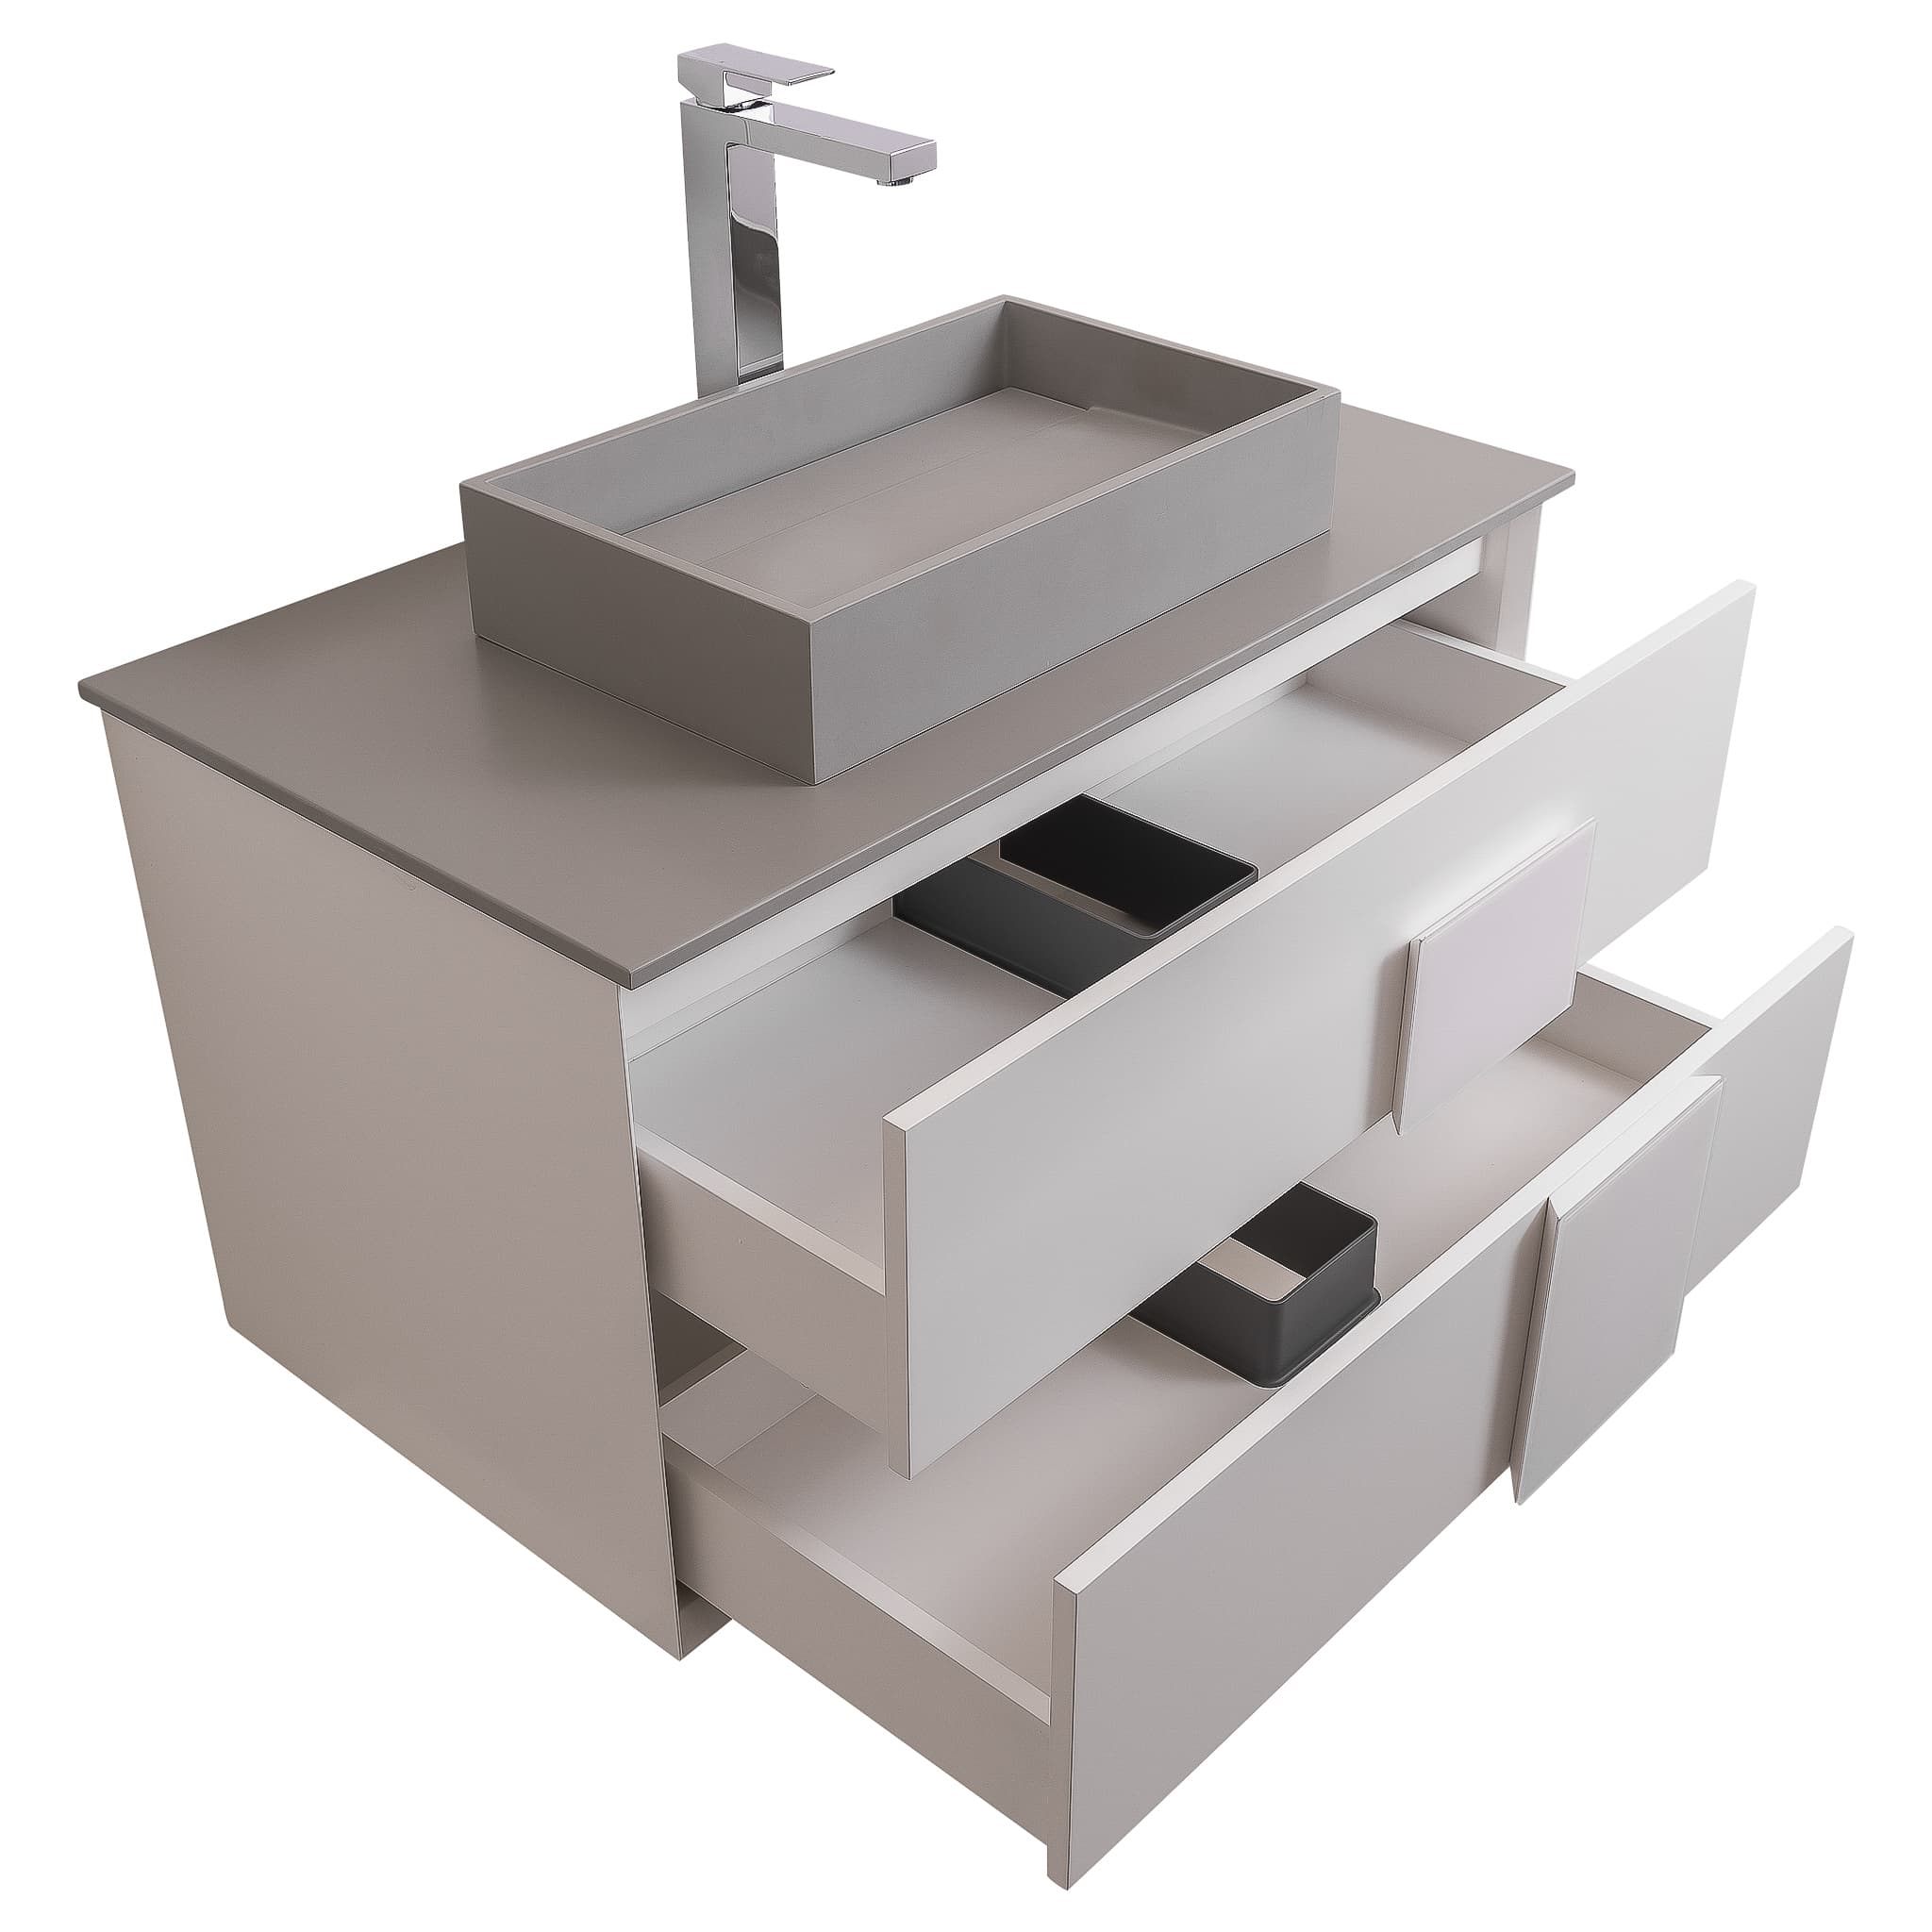 Piazza 31.5 Matte White With White Handle Cabinet, Solid Surface Flat Grey Counter and Infinity Square Solid Surface Grey Basin 1329, Wall Mounted Modern Vanity Set